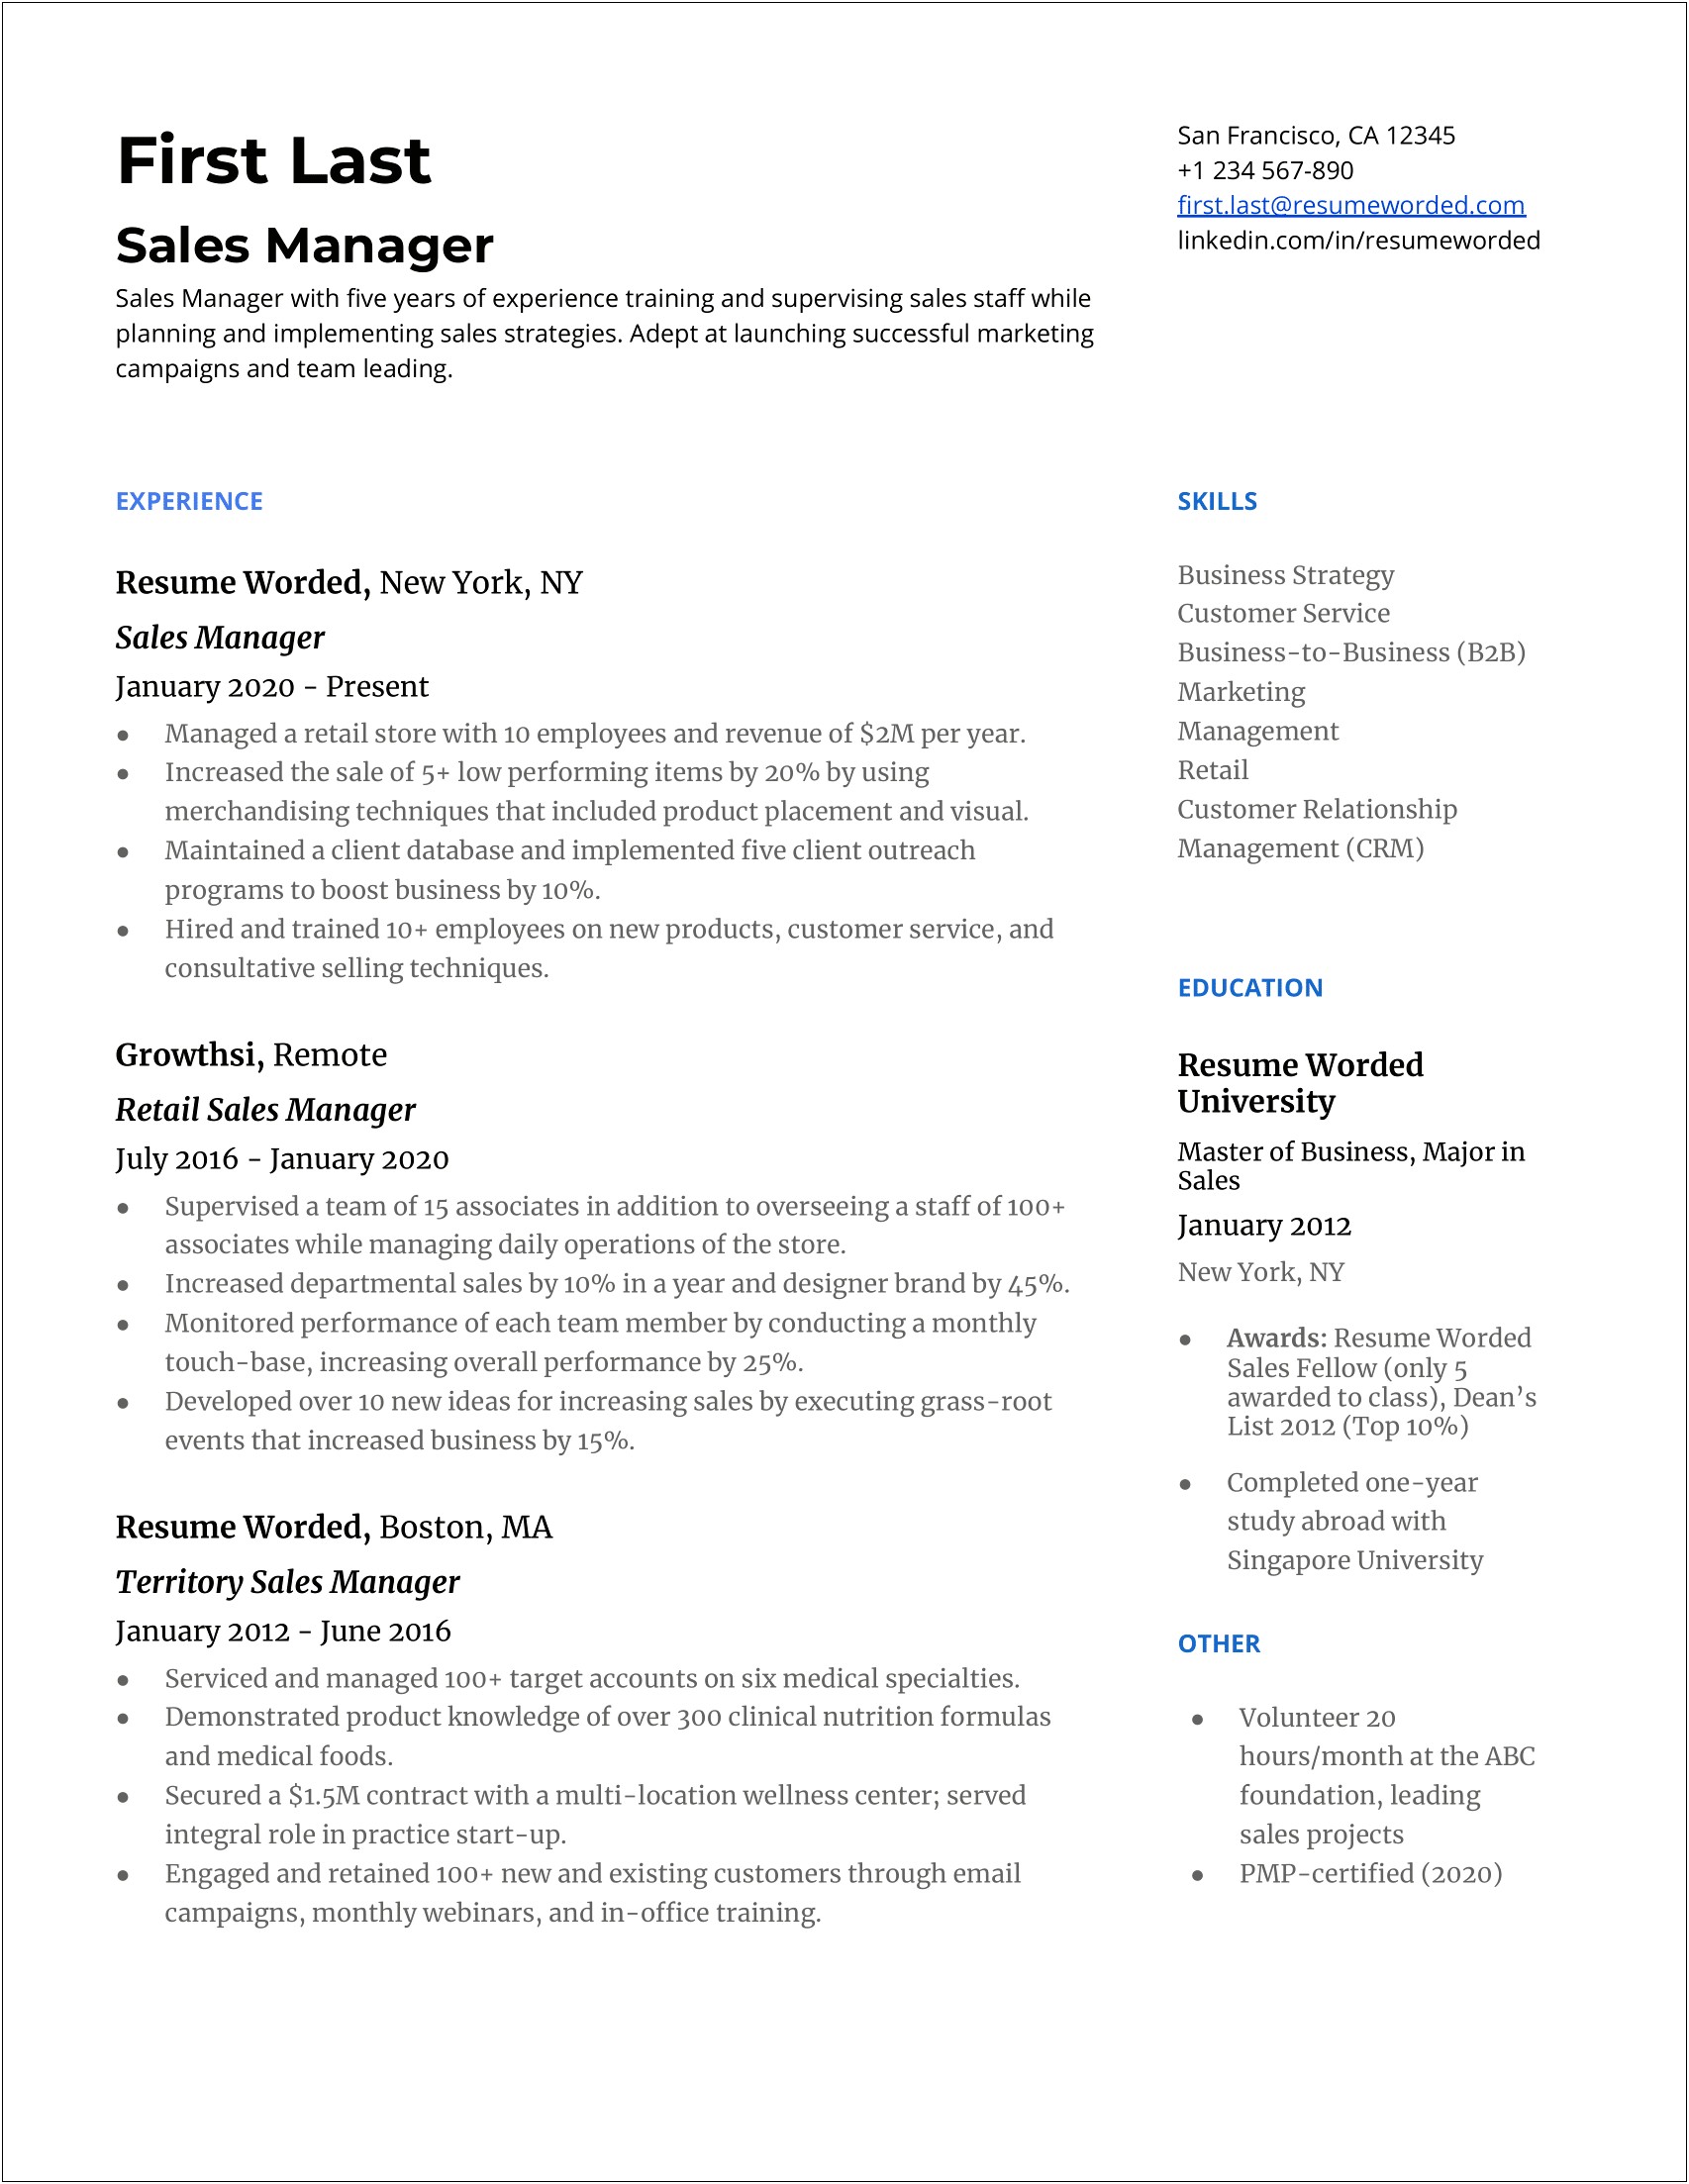 Listing Deans List On Resume Examples